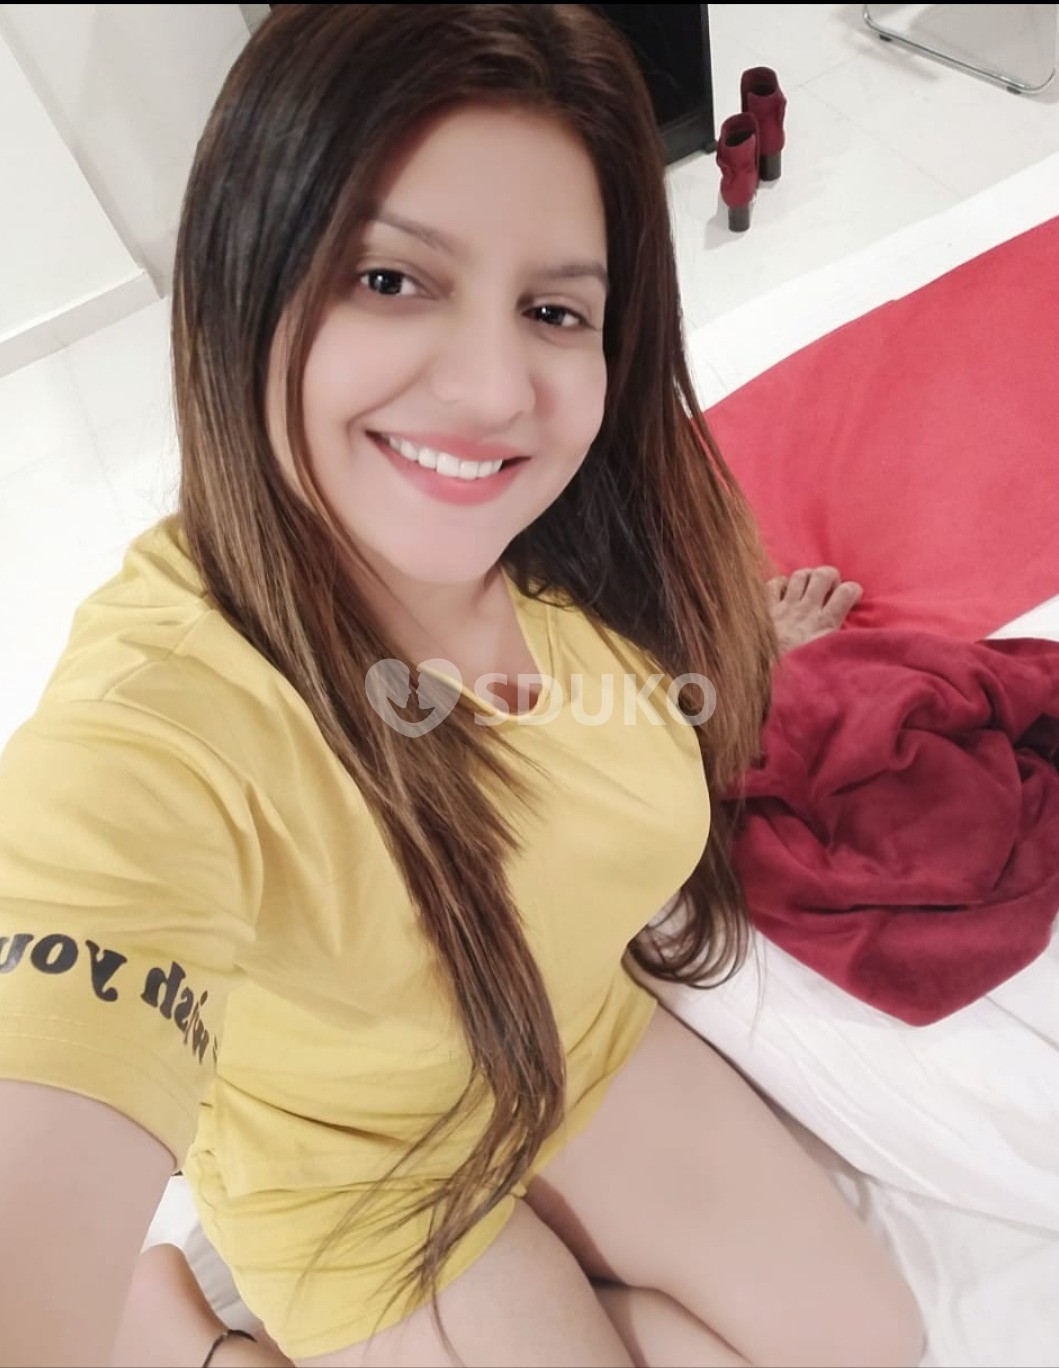 THALASSERY HOT 💋 GIRLS AVAILABLE ANYTIME